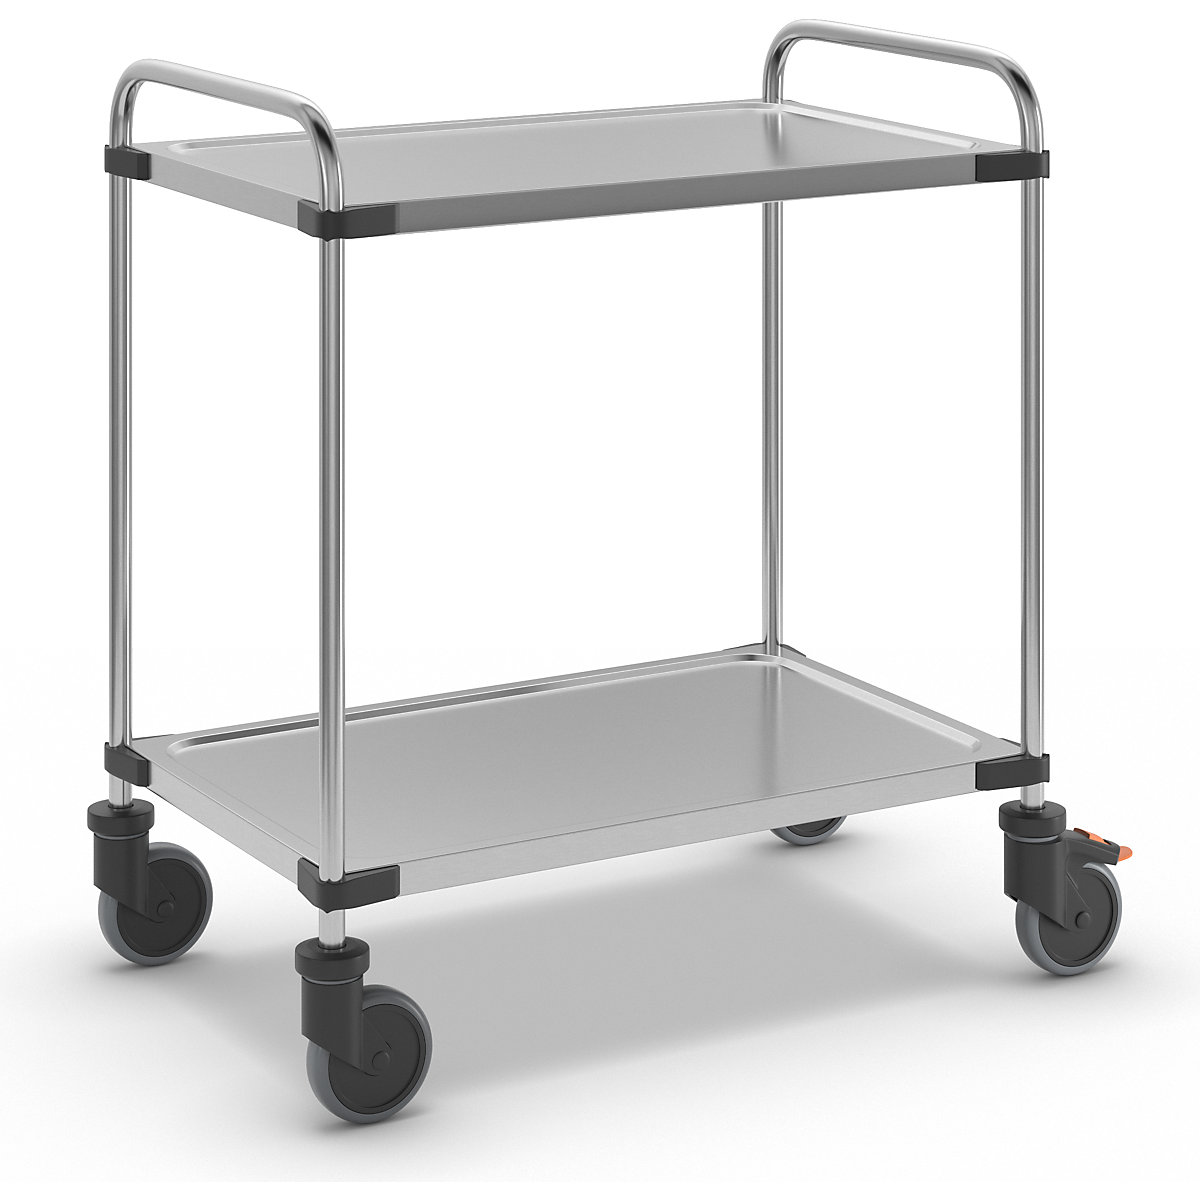 Stainless steel table trolley, with 2 shelves, LxWxH 870 x 570 x 950 mm, assembled-2